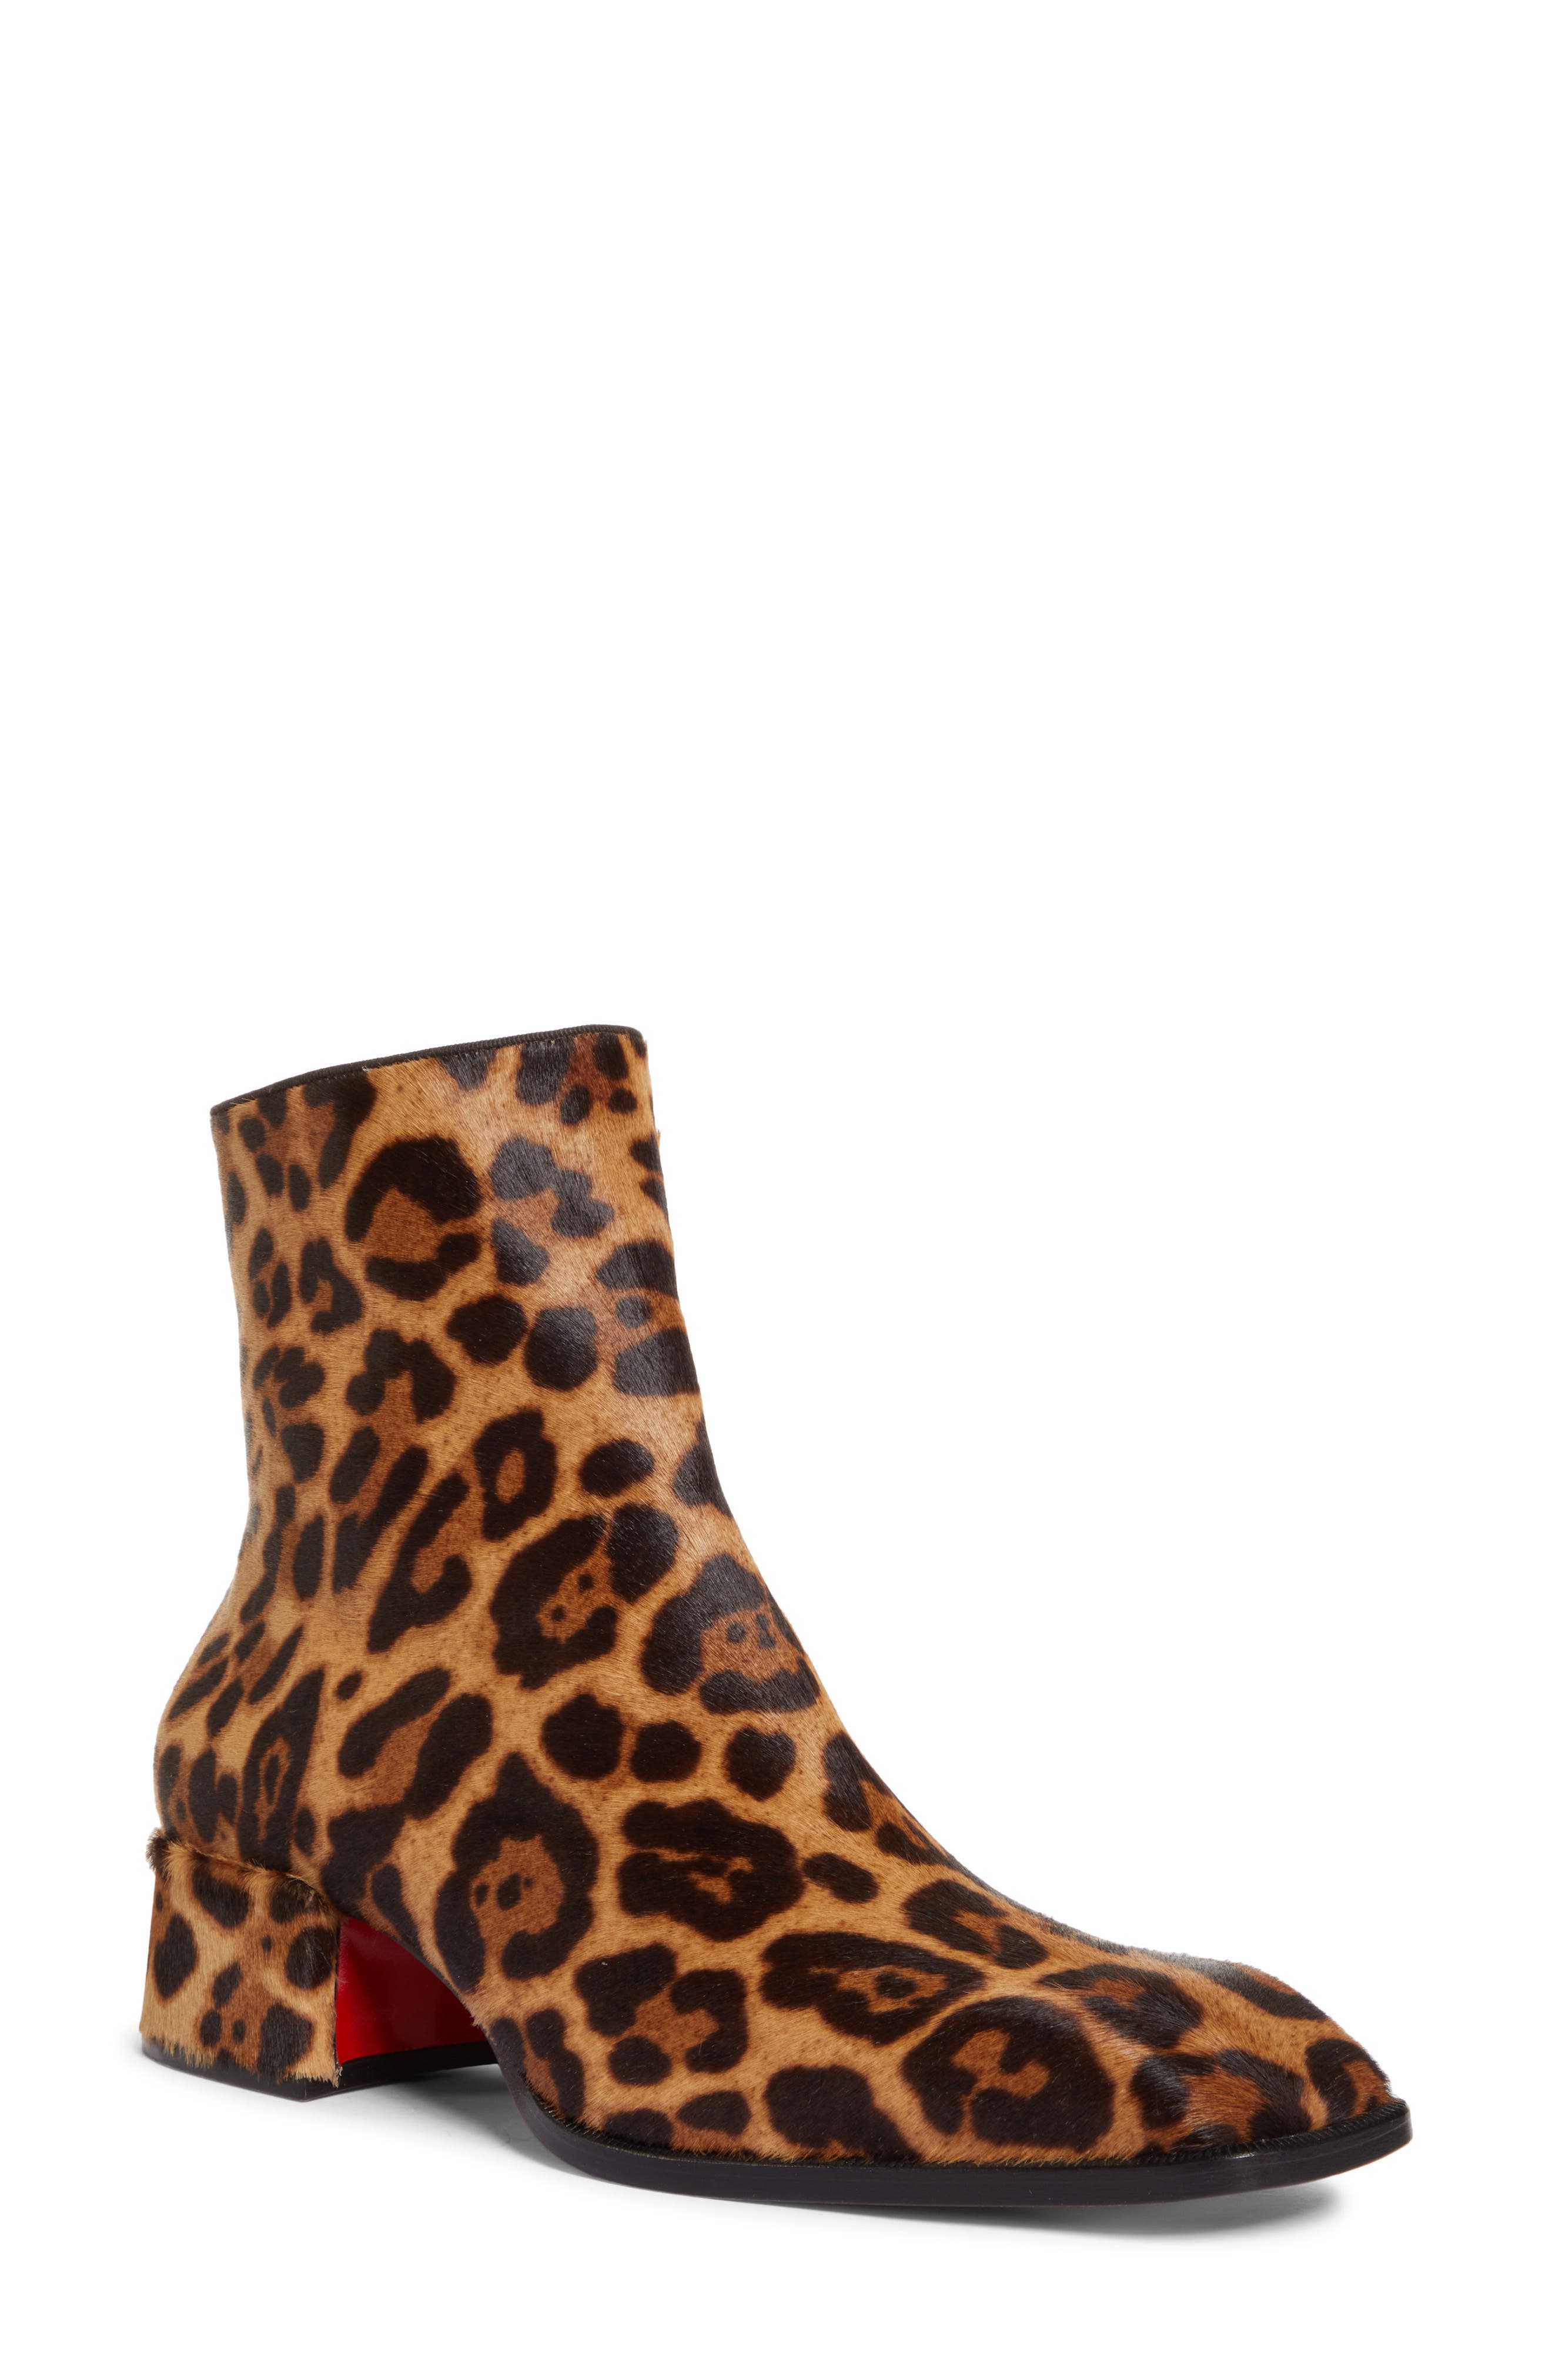 Christian Louboutin Fever Flat Leopard Genuine Calf Hair Boot in Brown Print Calf Hair at Nordstrom, Size 8Us